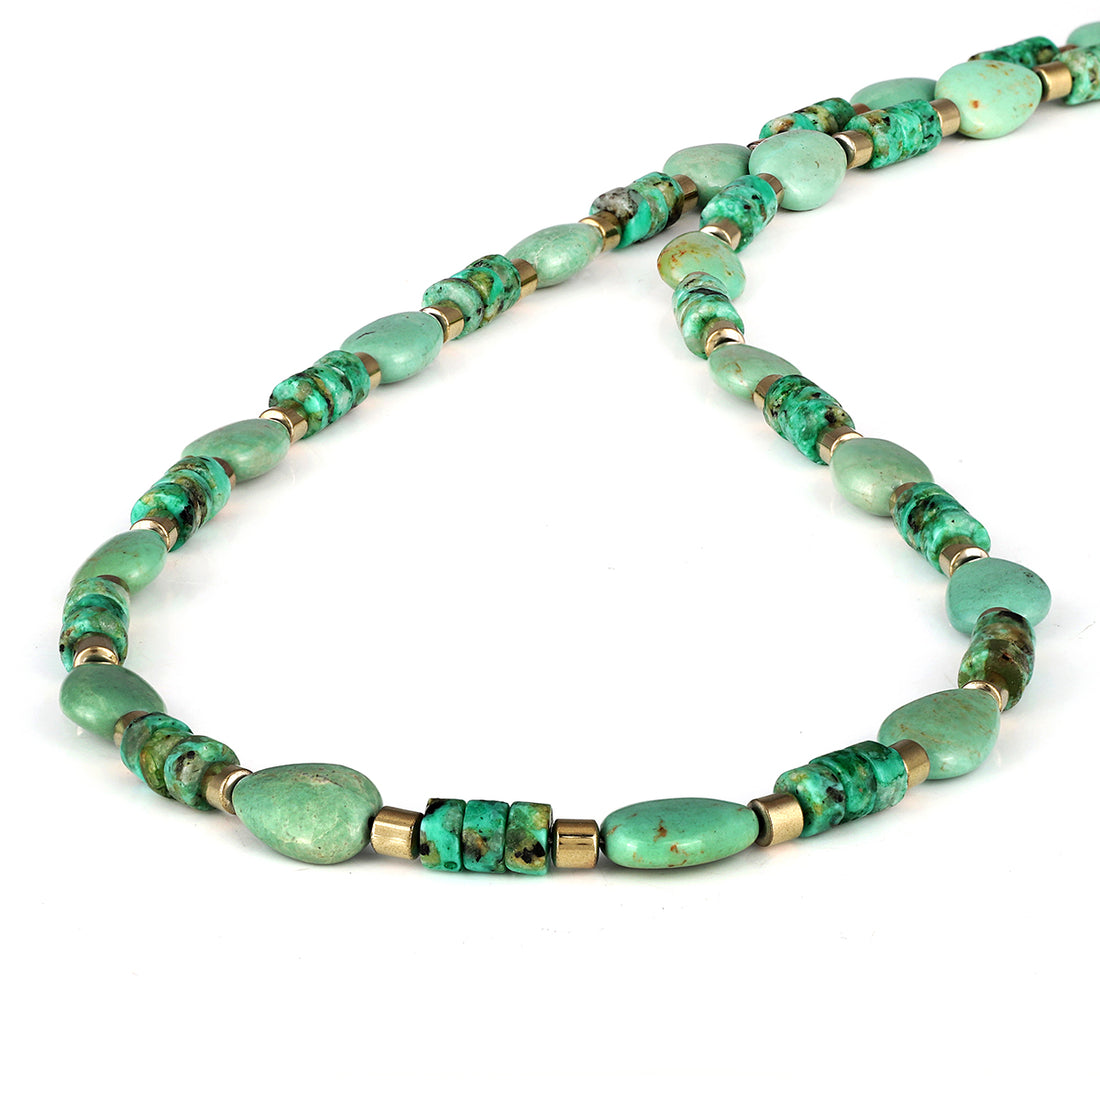 Turquoise and Hematite Beads Choker Necklace